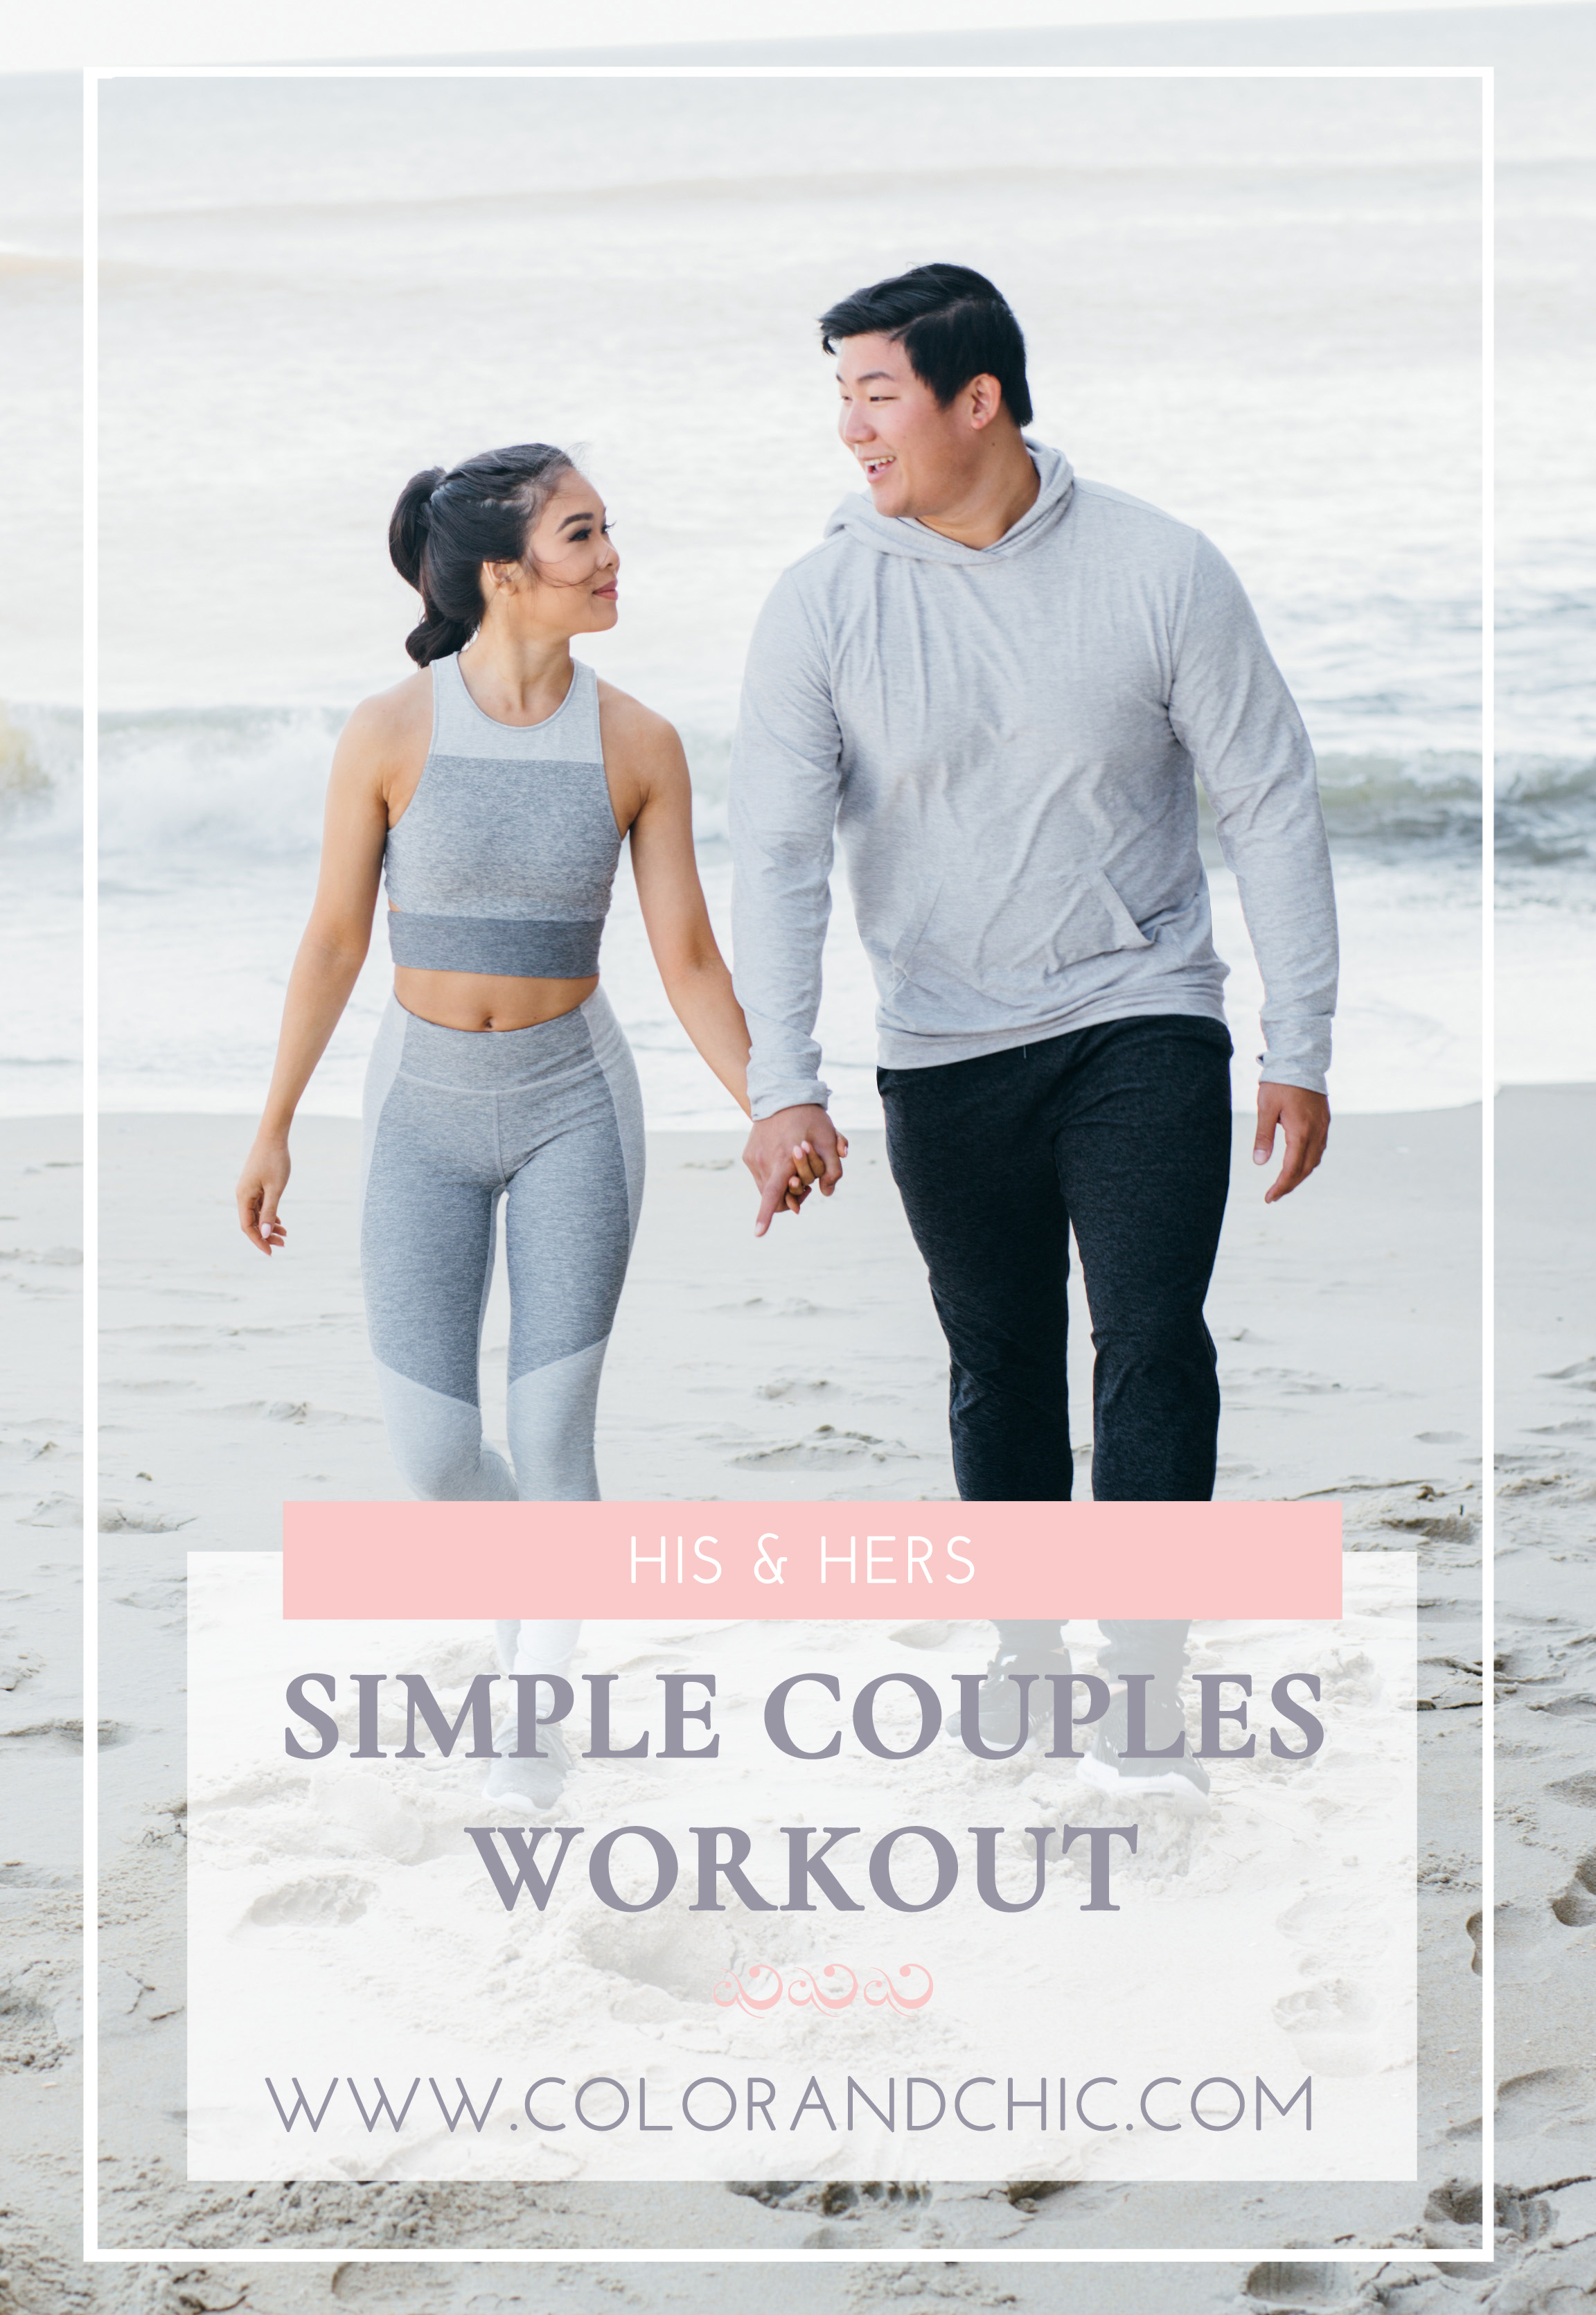 COLOR & CHIC | Simple Couples Workout wearing all gray activewear